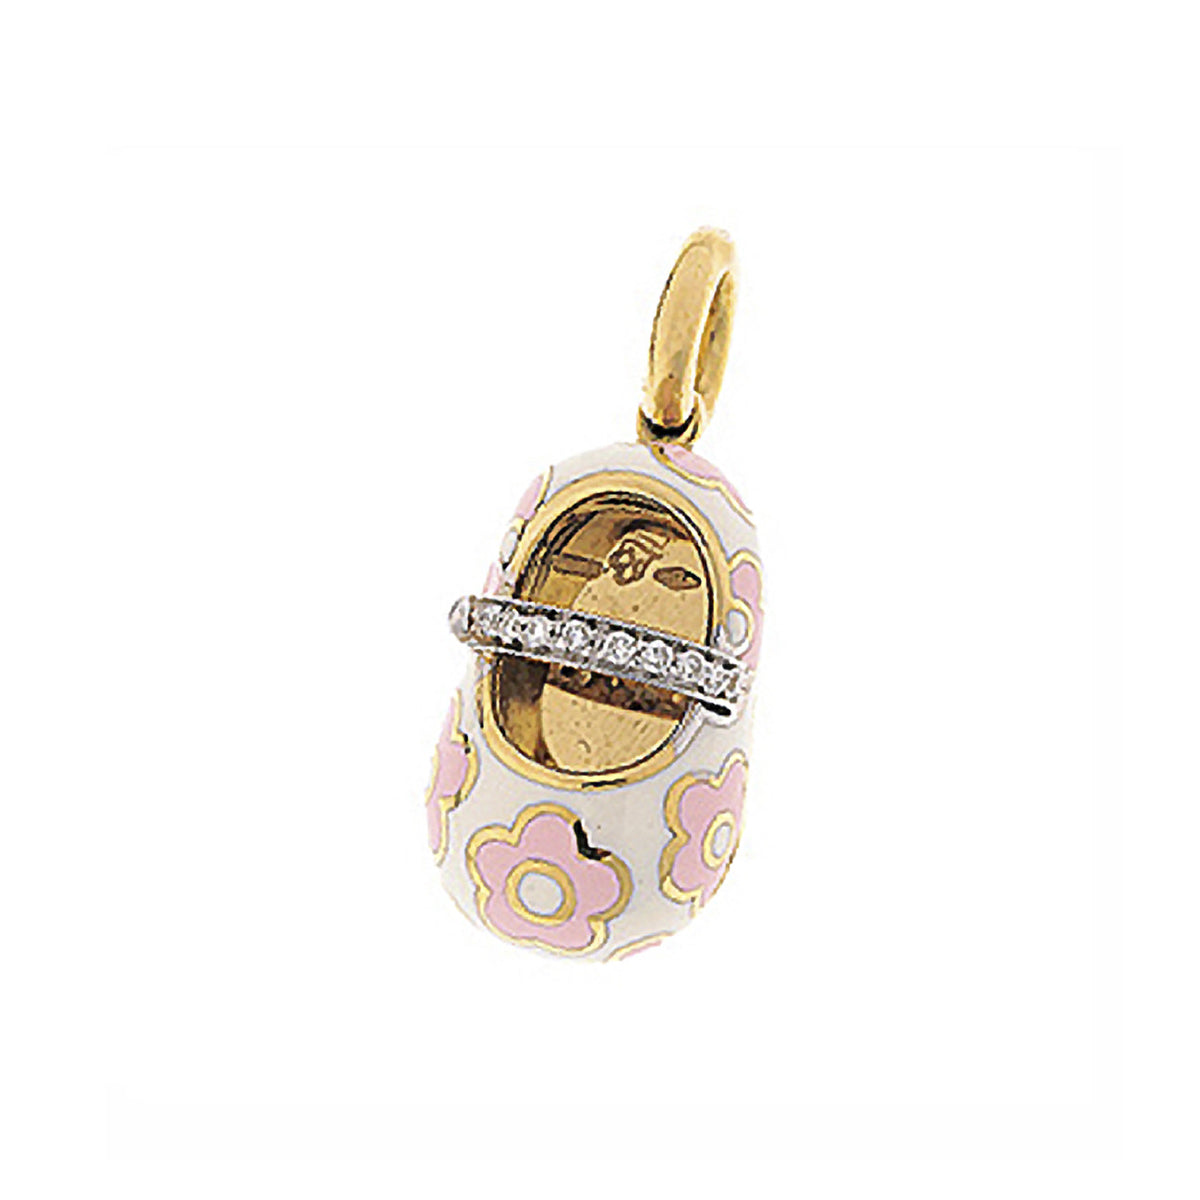 18K Yellow Gold & White Shoe Charm with Pink Flowers